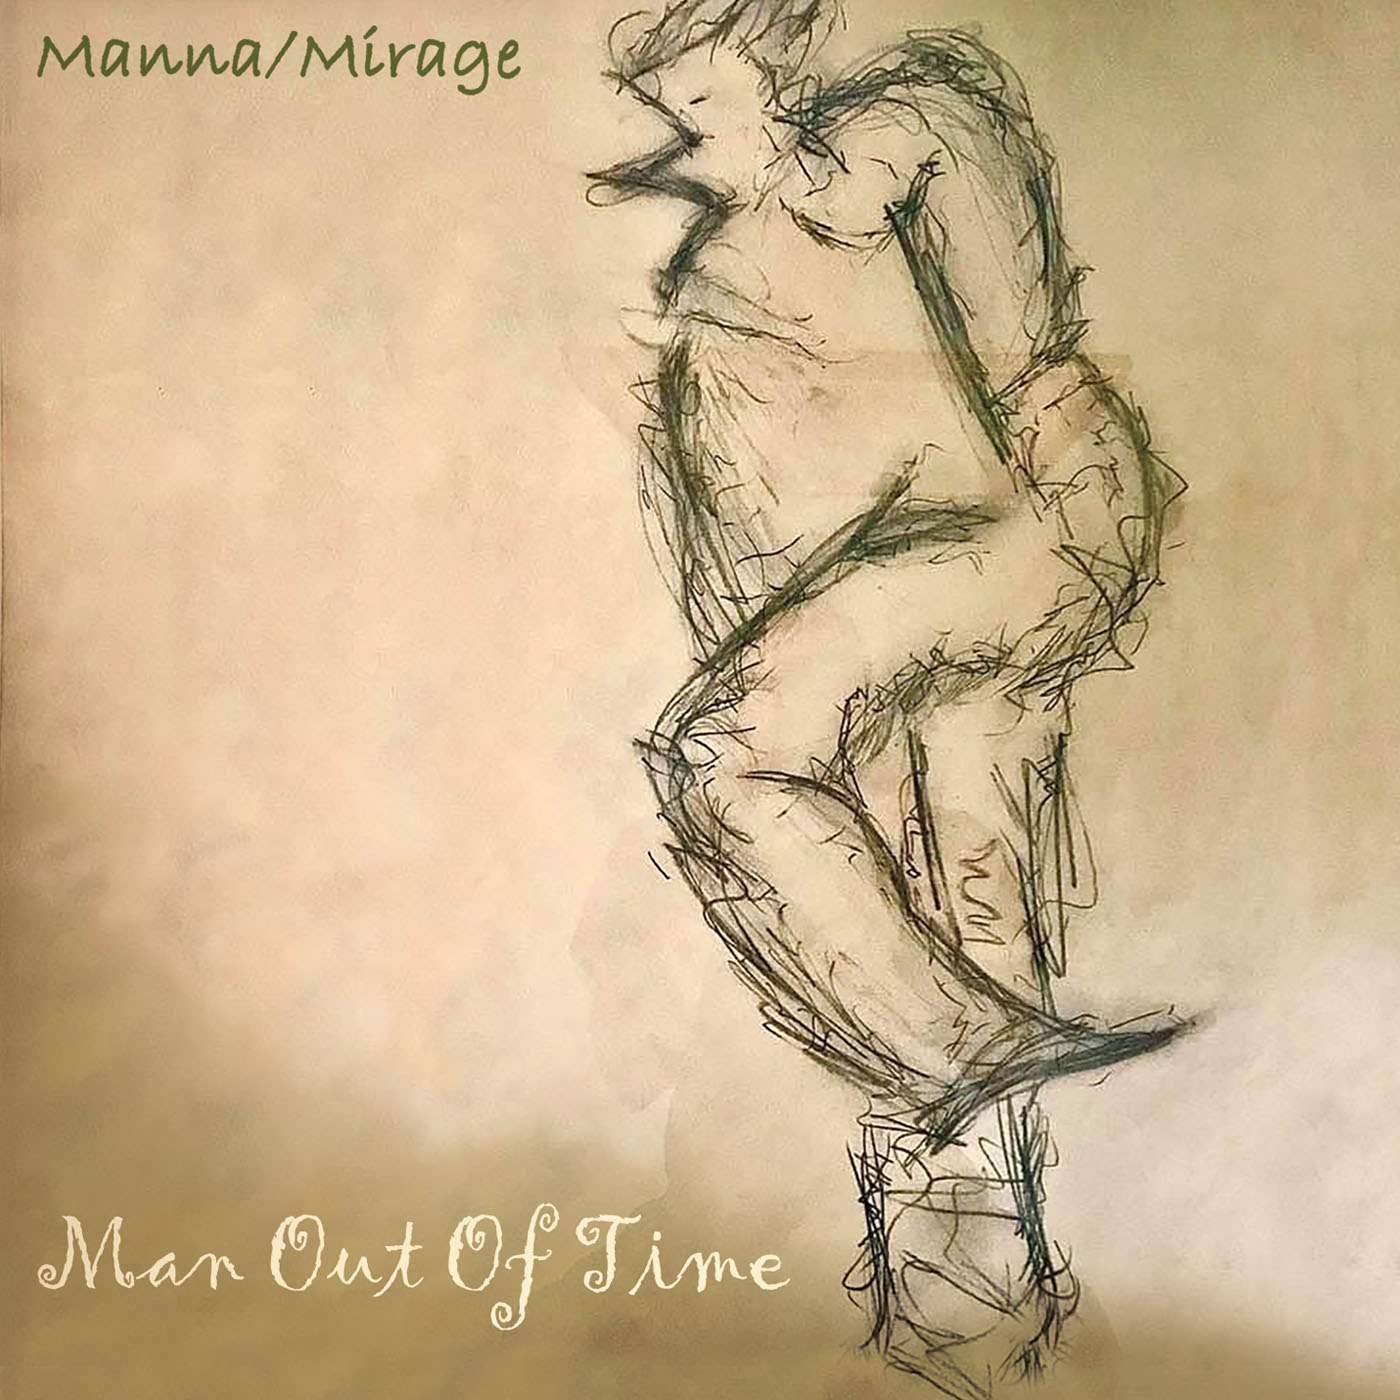 Manna/Mirage – Man Out Of Time (2021) [FLAC 24bit/44,1kHz]